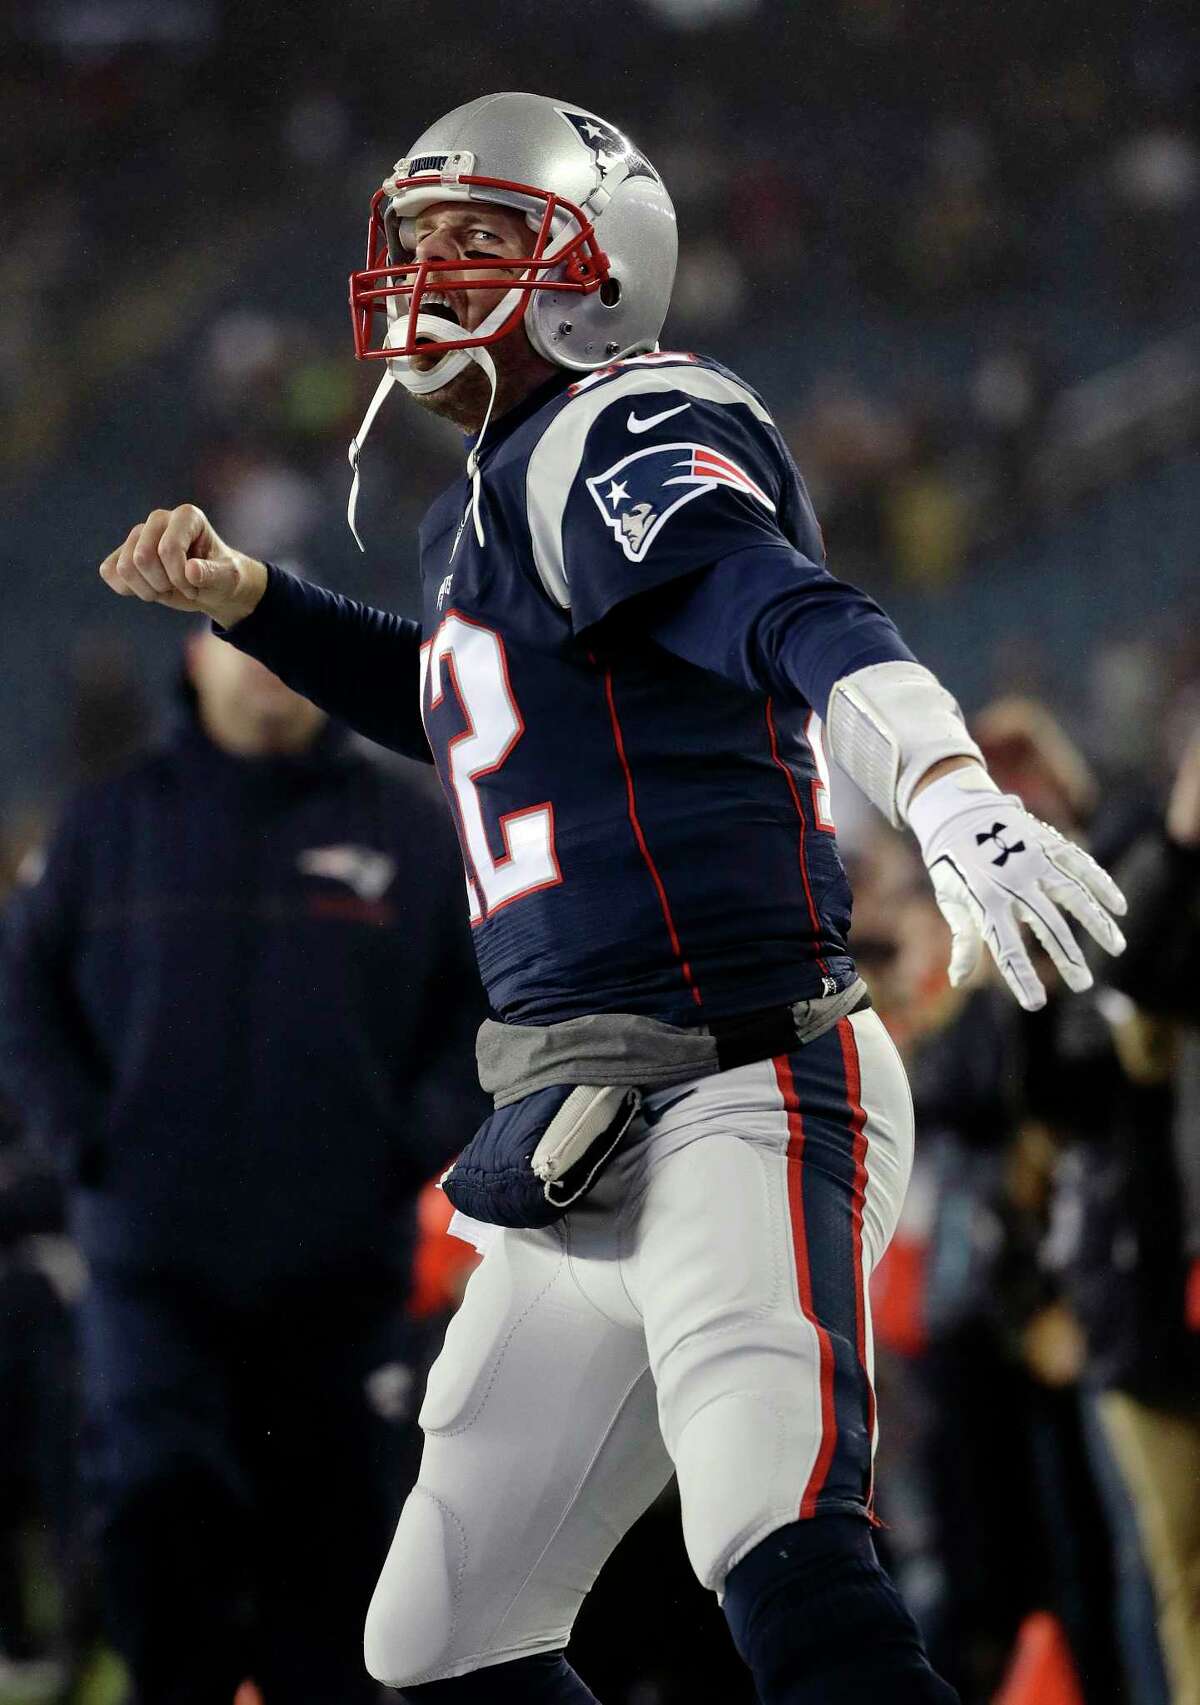 New England Patriots quarterback Tom Brady shouts as he takes the field to warm up before the AFC championship NFL football game against the Pittsburgh Steelers, Sunday, Jan. 22, 2017, in Foxborough, Mass. (AP Photo/Matt Slocum)